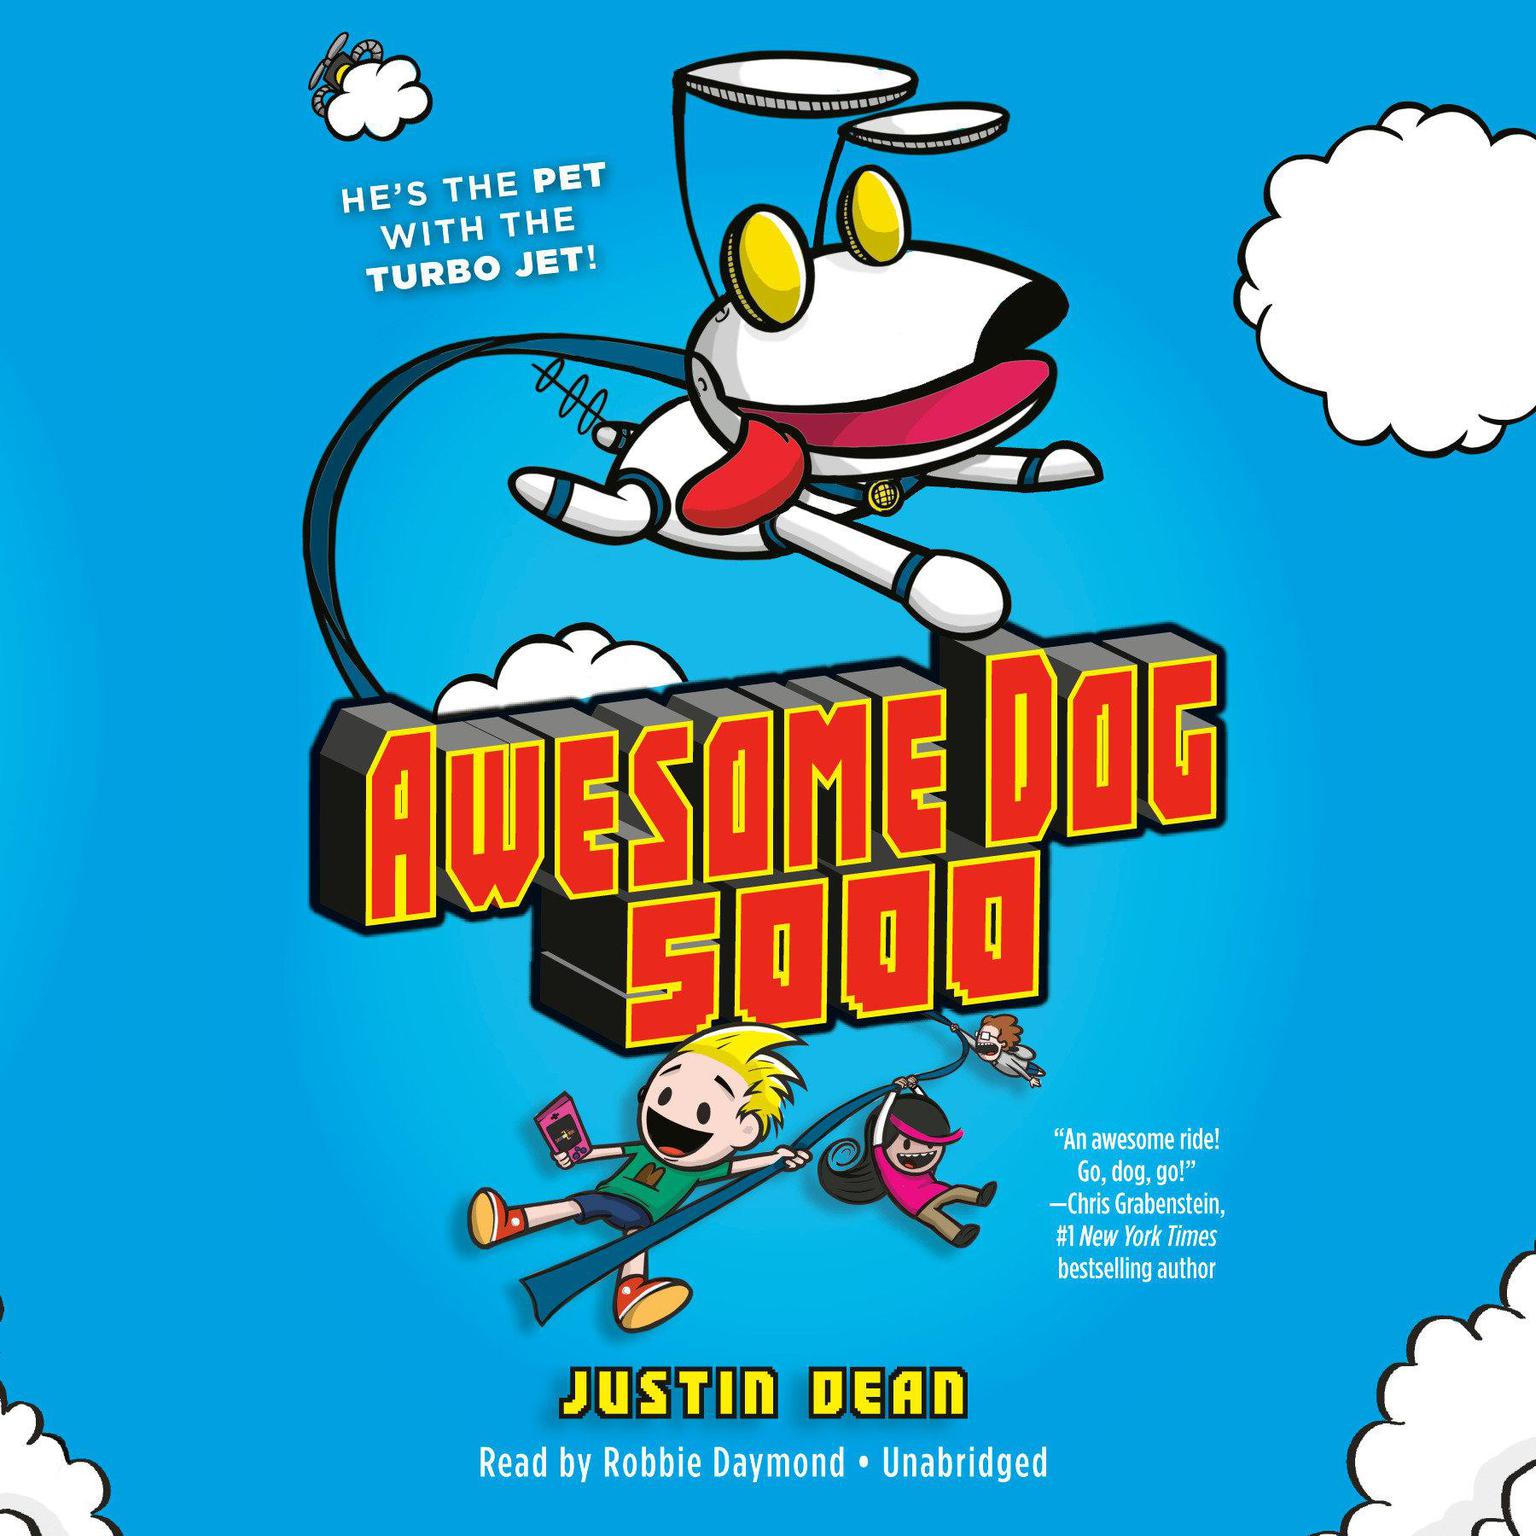 Awesome Dog 5000 (Book 1) Audiobook, by Justin Dean